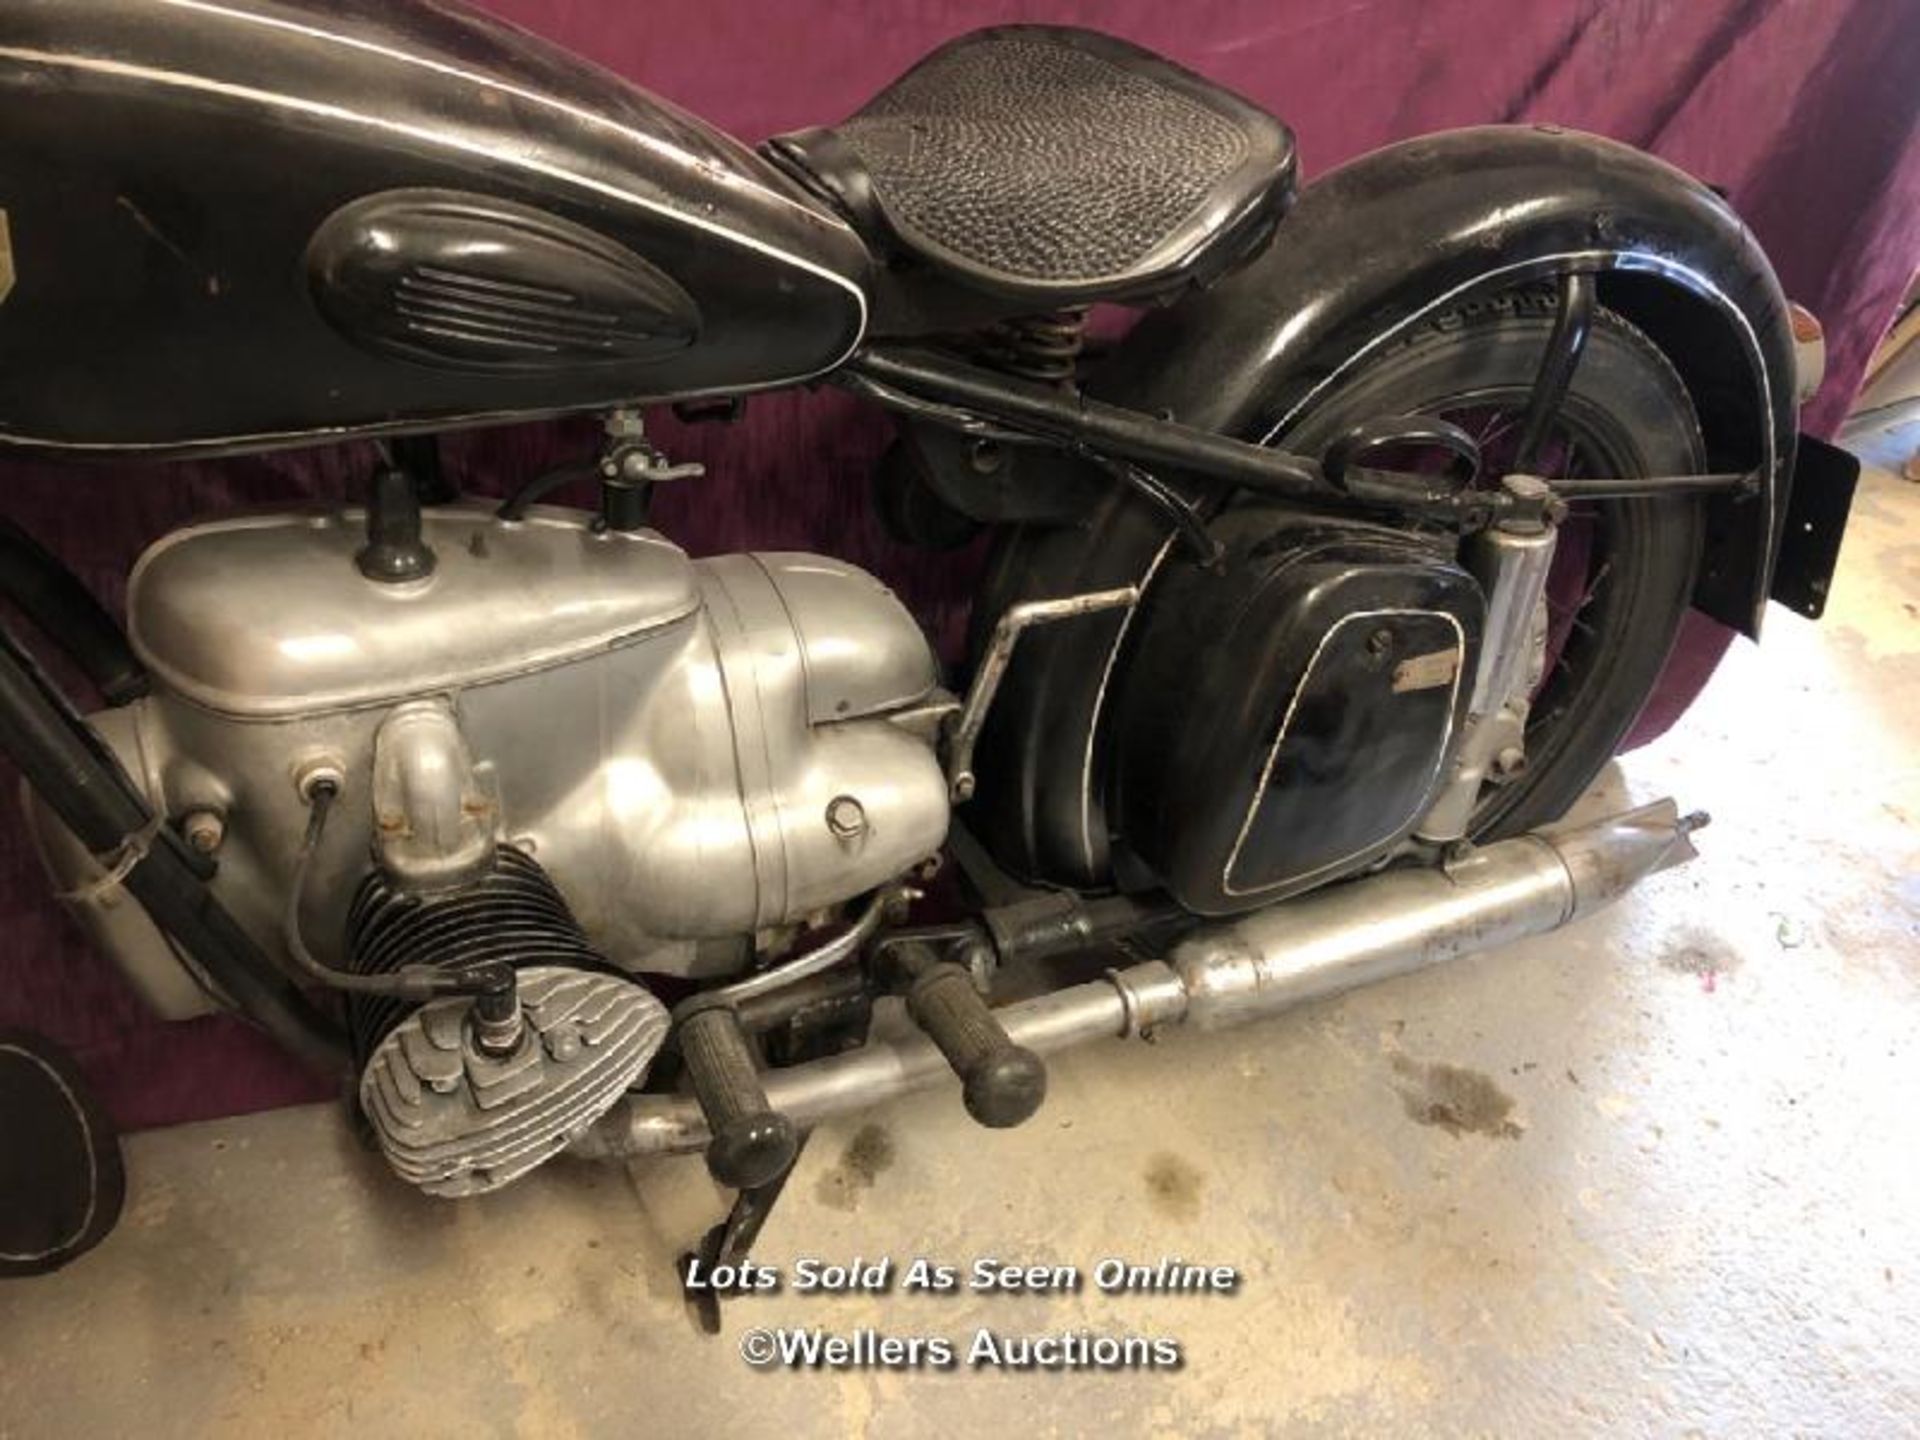 IFA 350 HORIZONTALLY OPPOSED TWIN CYLINDER 1954 MOTORCYCLE, TAX EXEMPT, RUNS WITH GOOD - Image 7 of 12